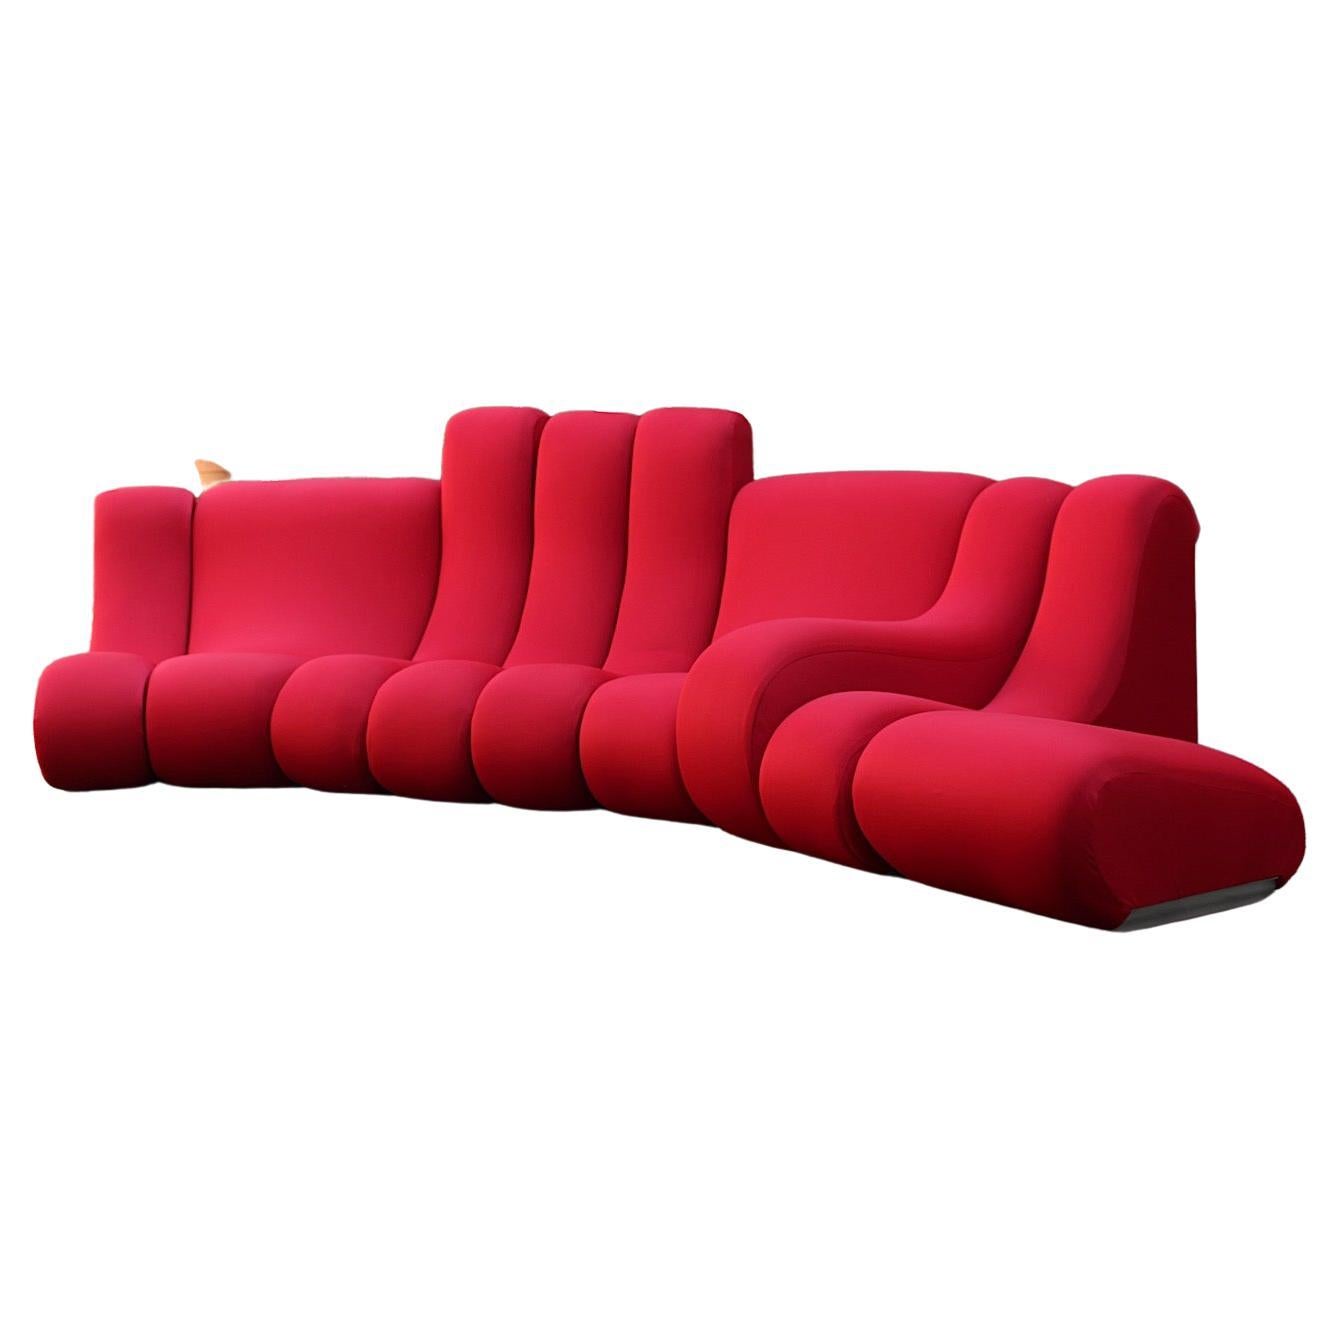 Space Age Vintage Red Sectional Freestanding Sofa Vario Pillo Burghardt Vogtherr For Sale